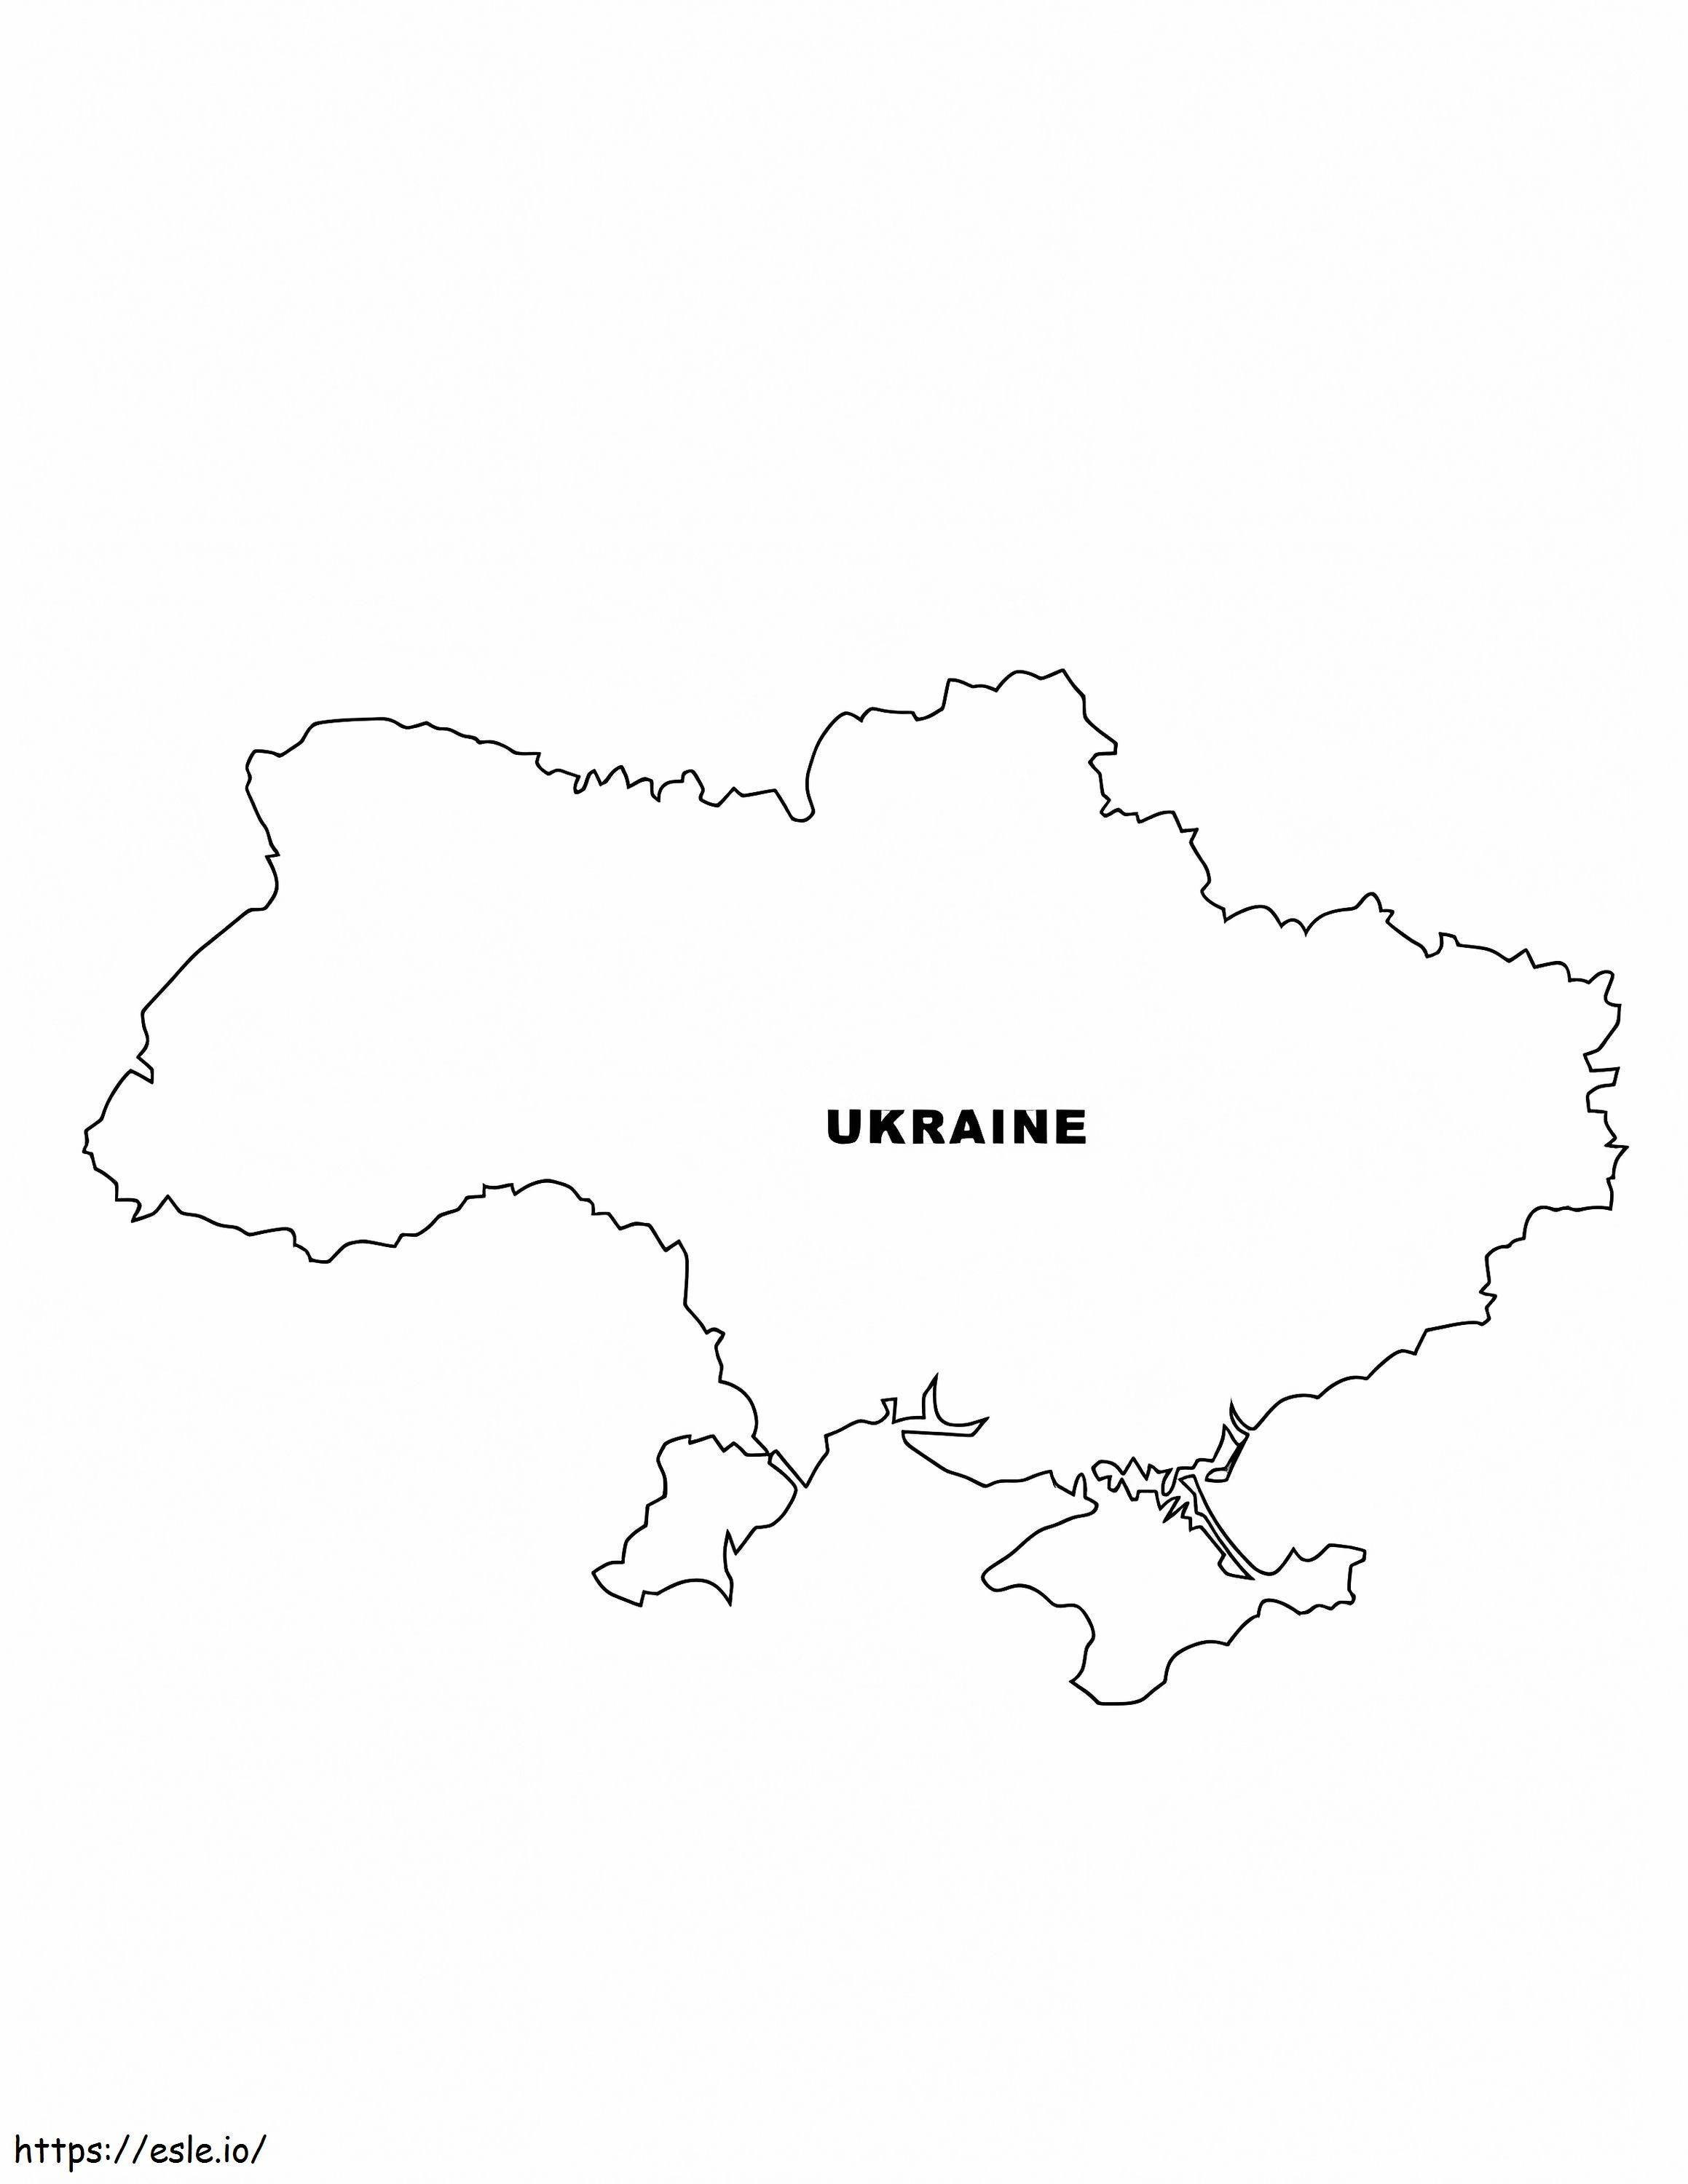 Ukraine Map coloring page